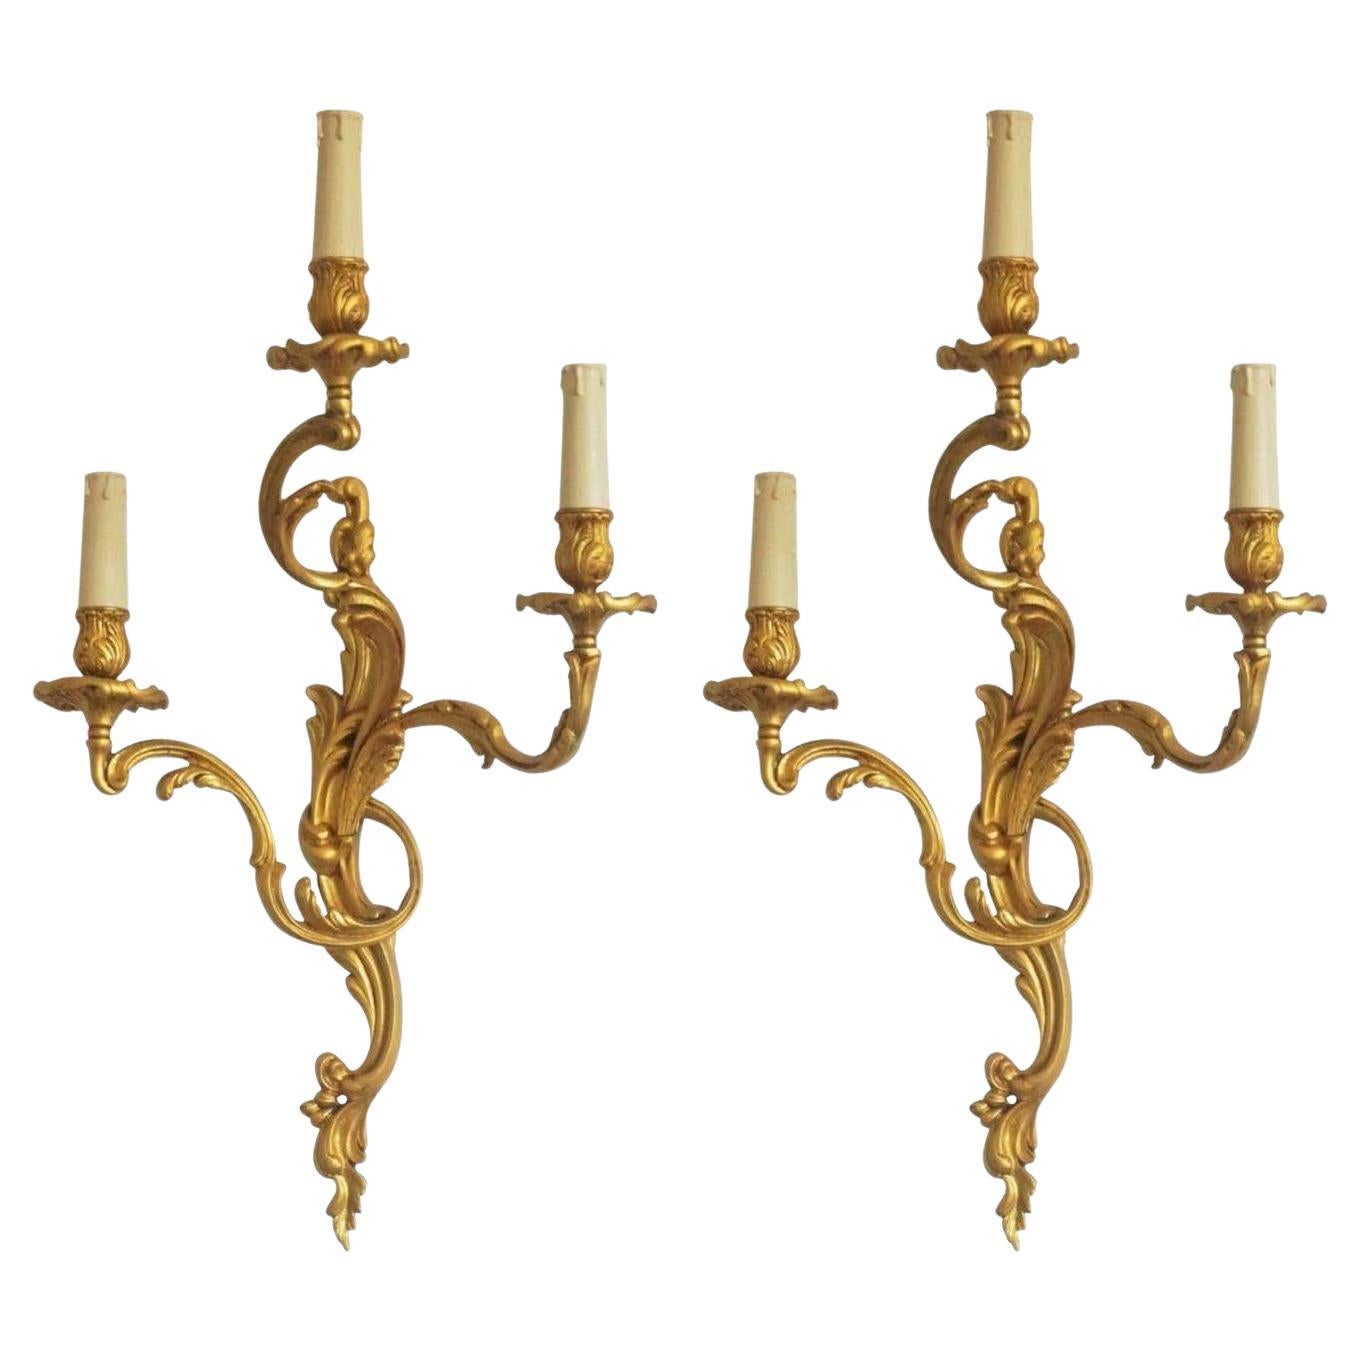 Pair of Large French Louis XVI Style Gilt Bronze Three-Light Wall Sconces